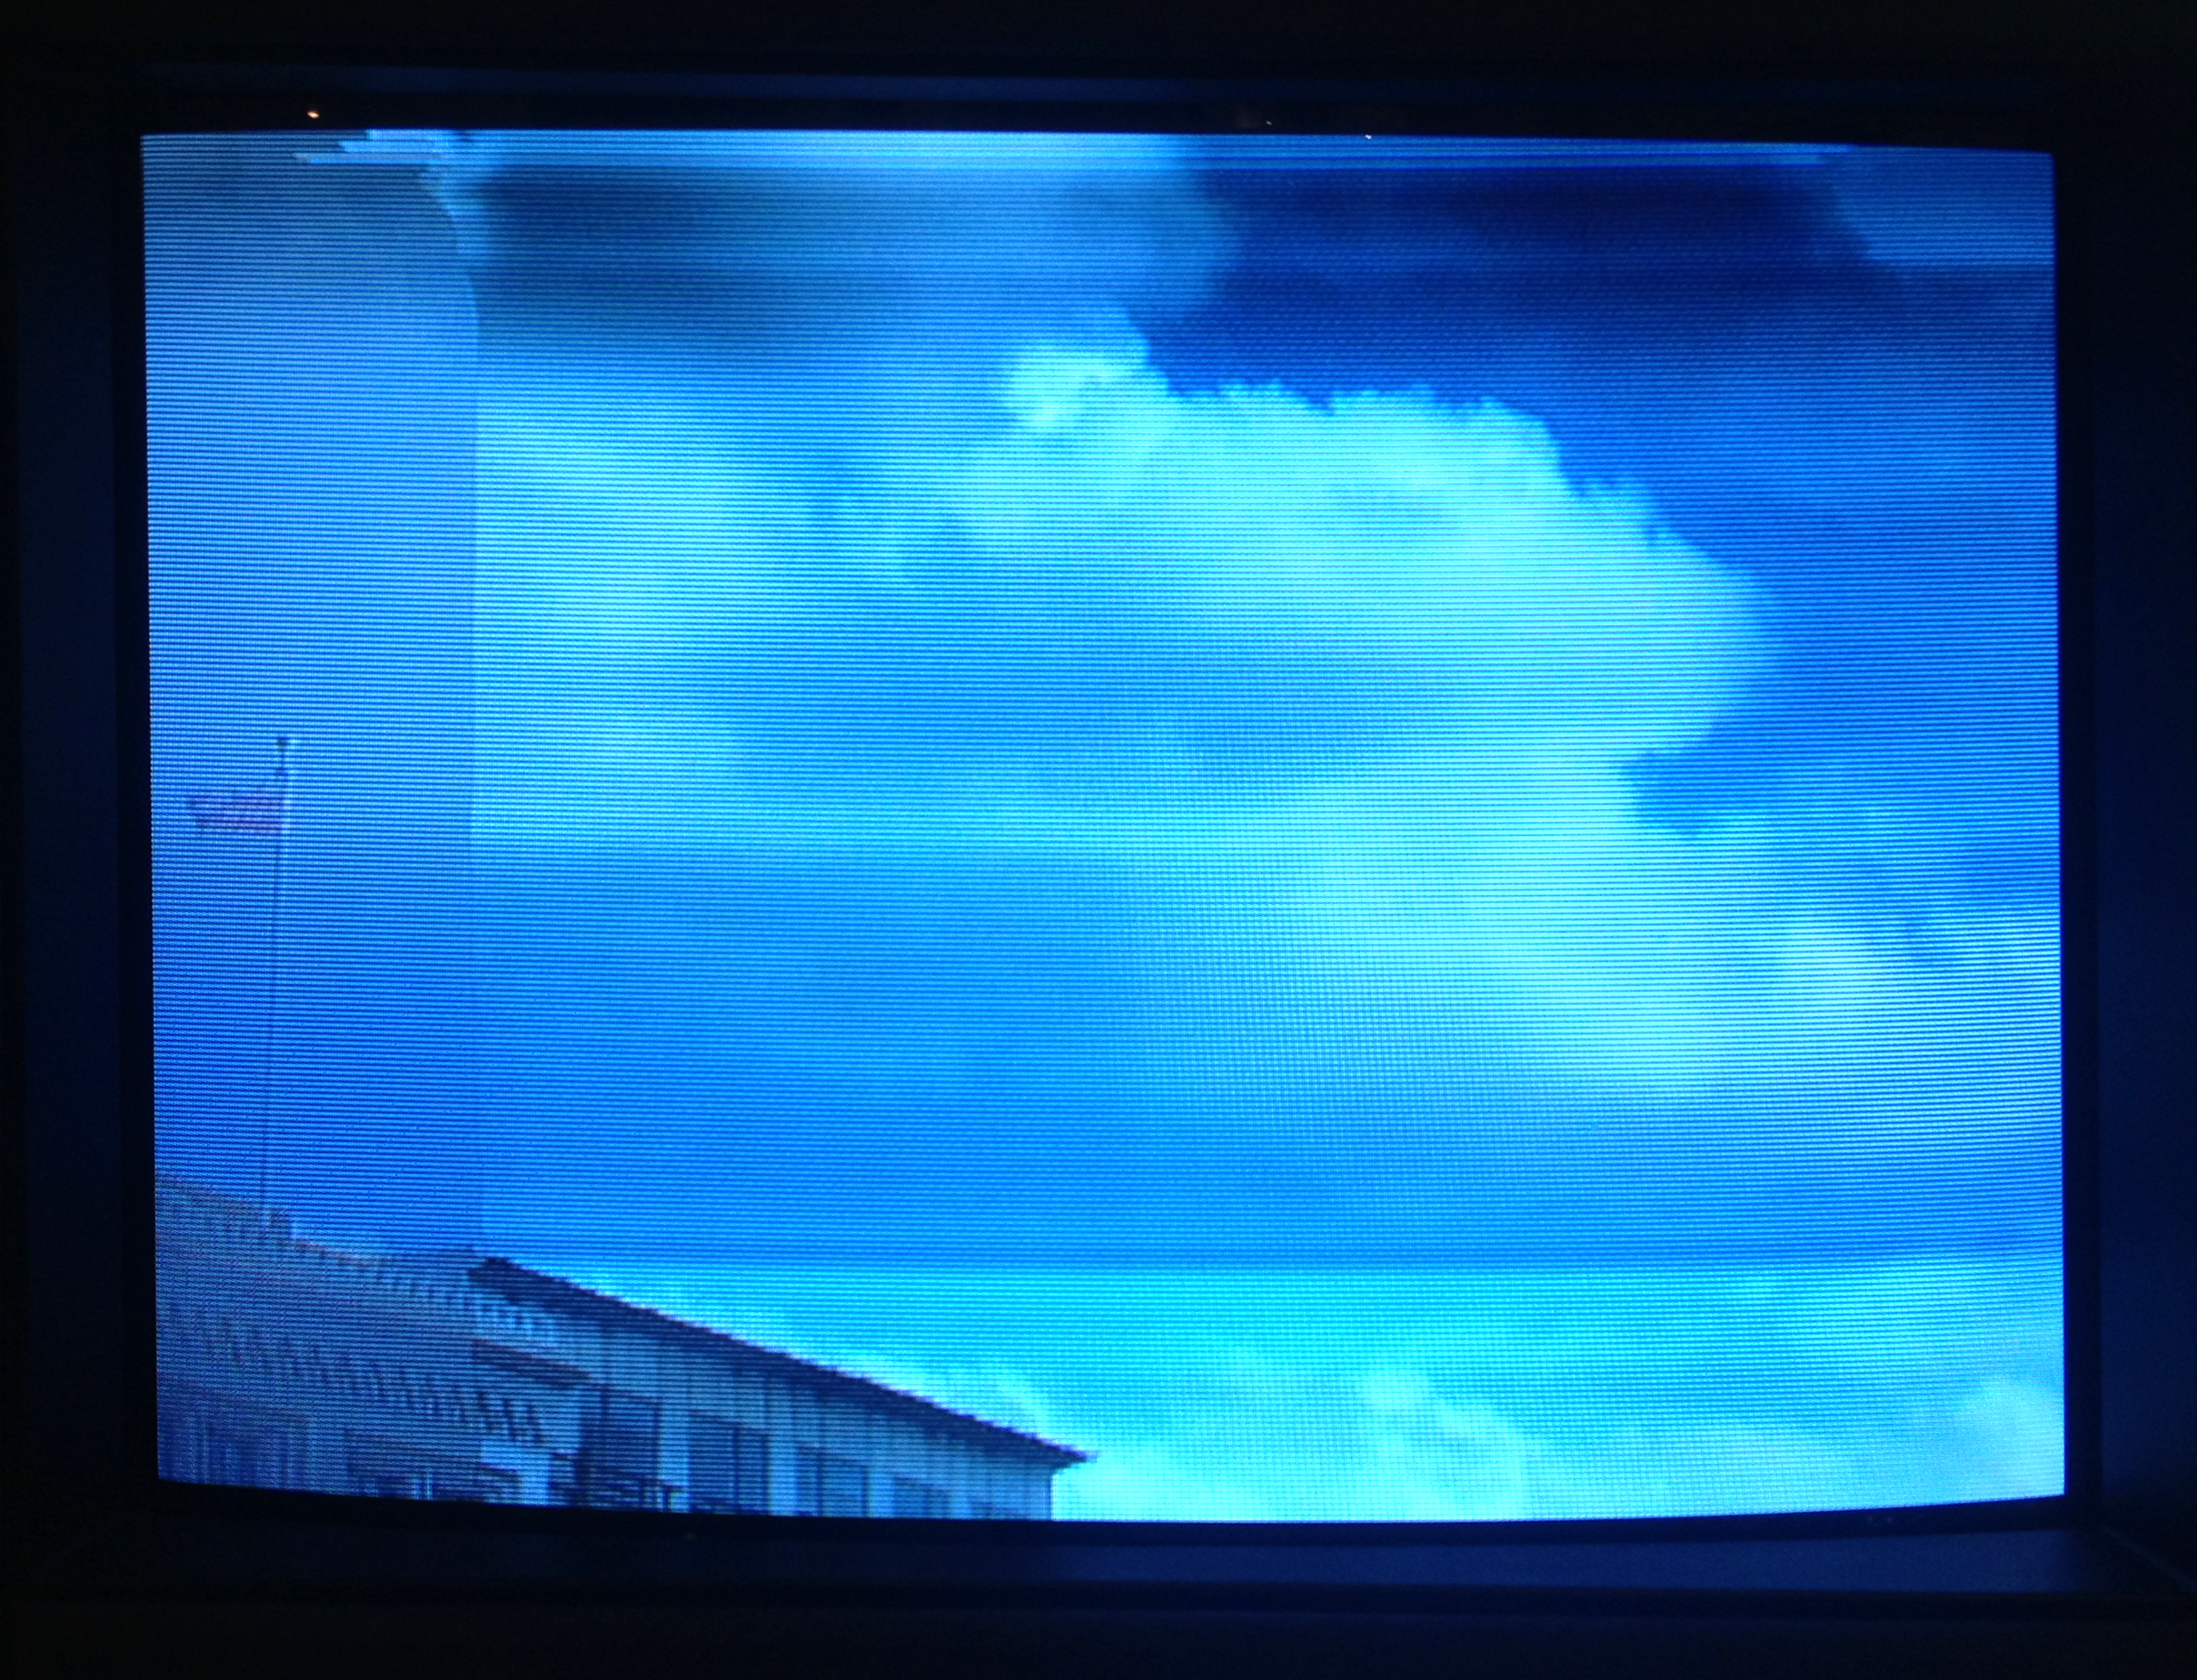 Documentation of the distorted video signal on a video monitor